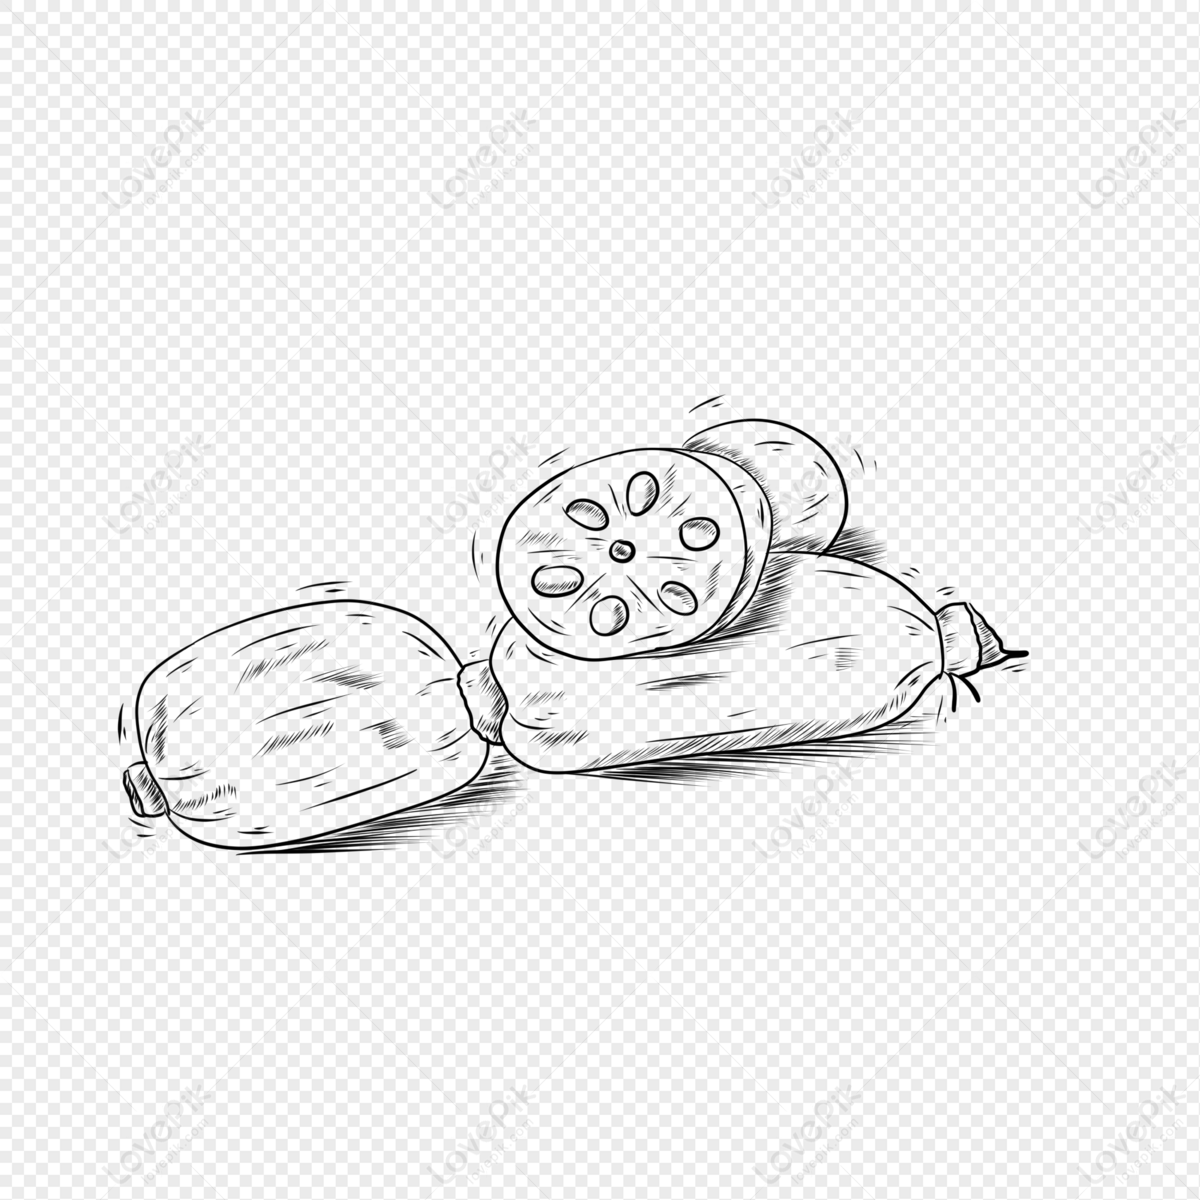 Food Vegetable Black And White Lineart Free PNG And Clipart Image For Free  Download - Lovepik | 401693529